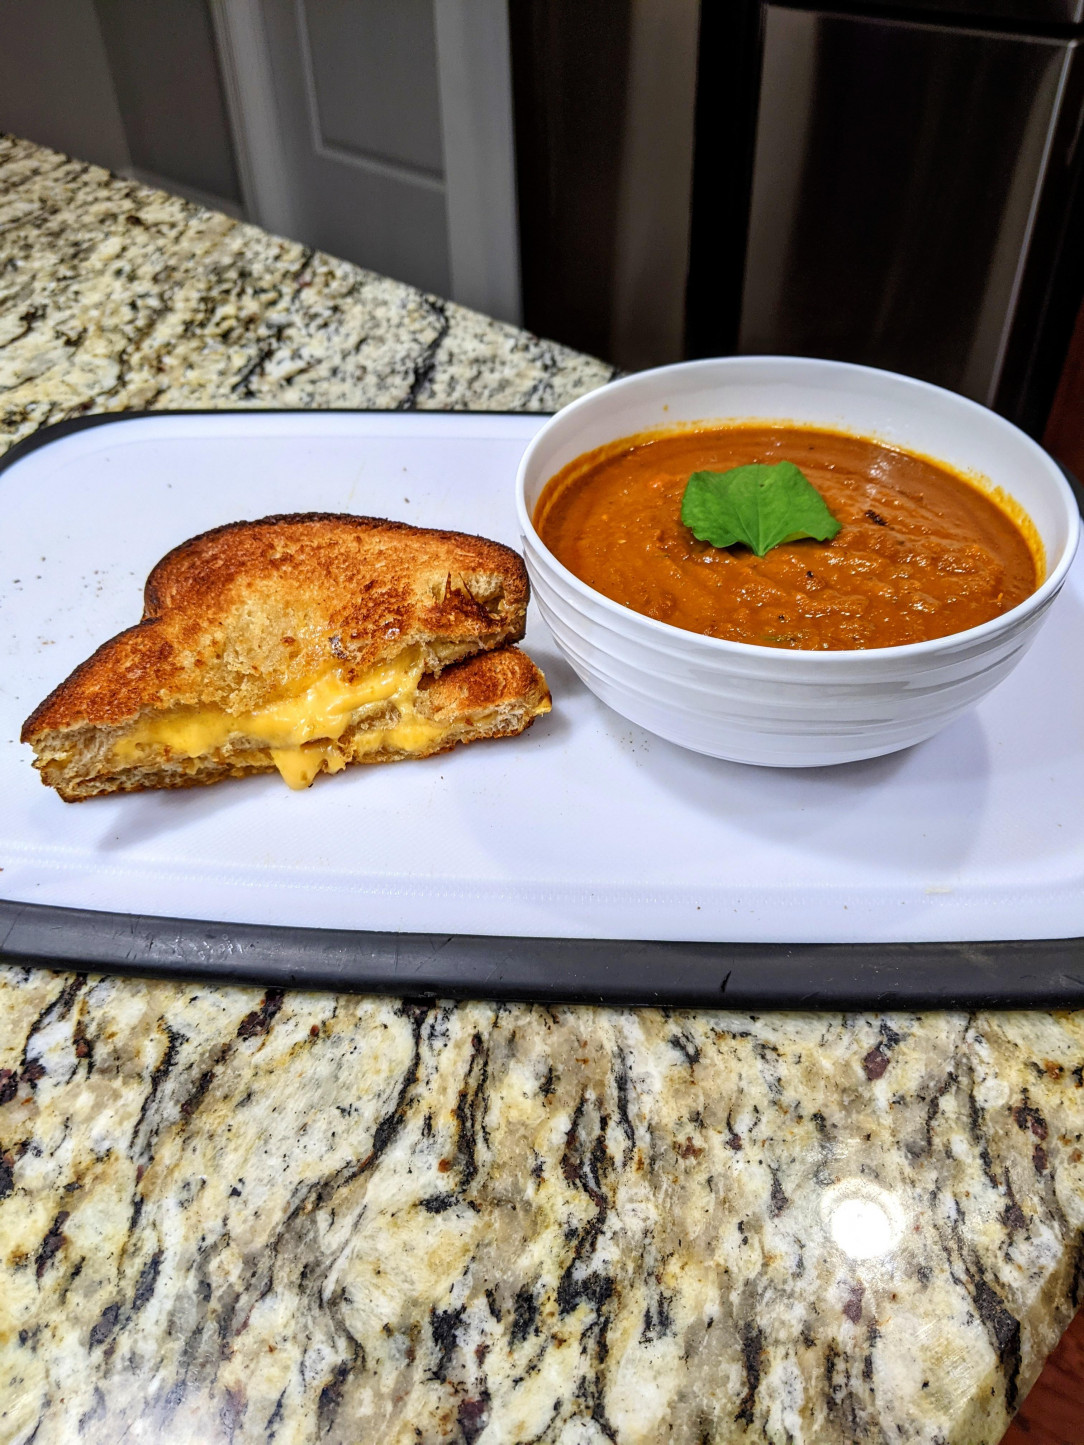 classic grilled cheese w/ roasted tomato soup